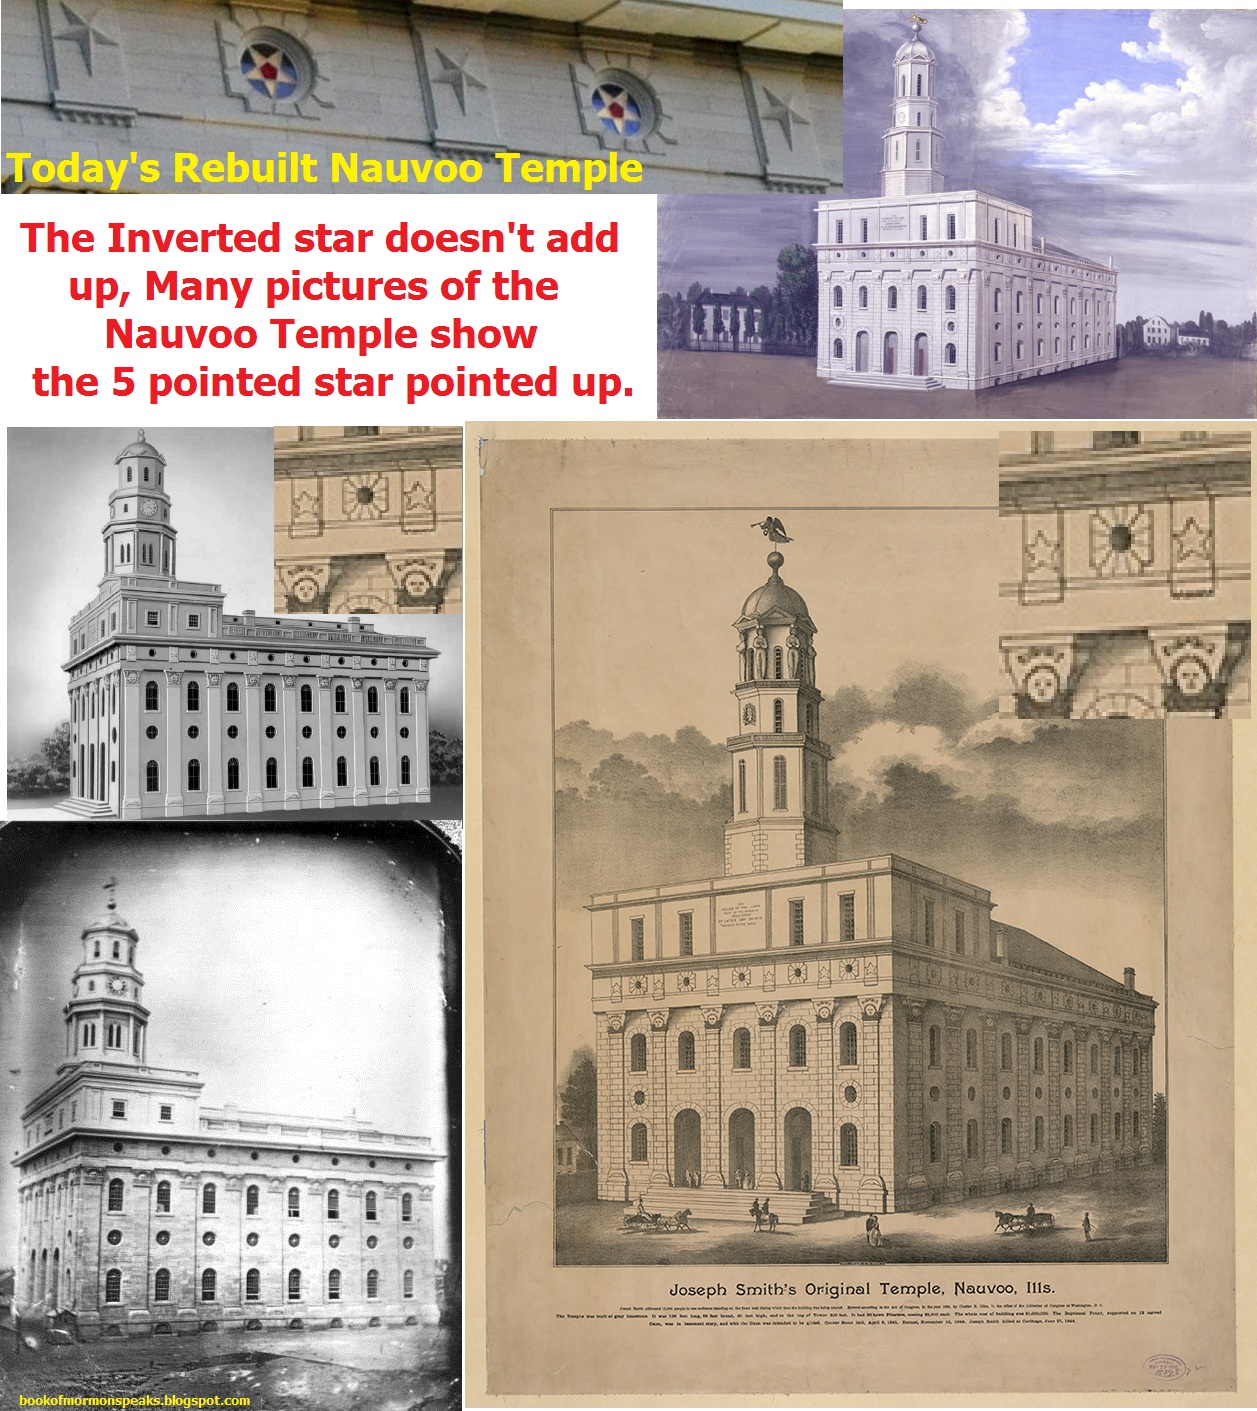 Lds Inverted Star Doesn't Add Up To All The Pictures Of The Nauvoo Temple Most Show The 5 Pointed Star Pointed Up (1)